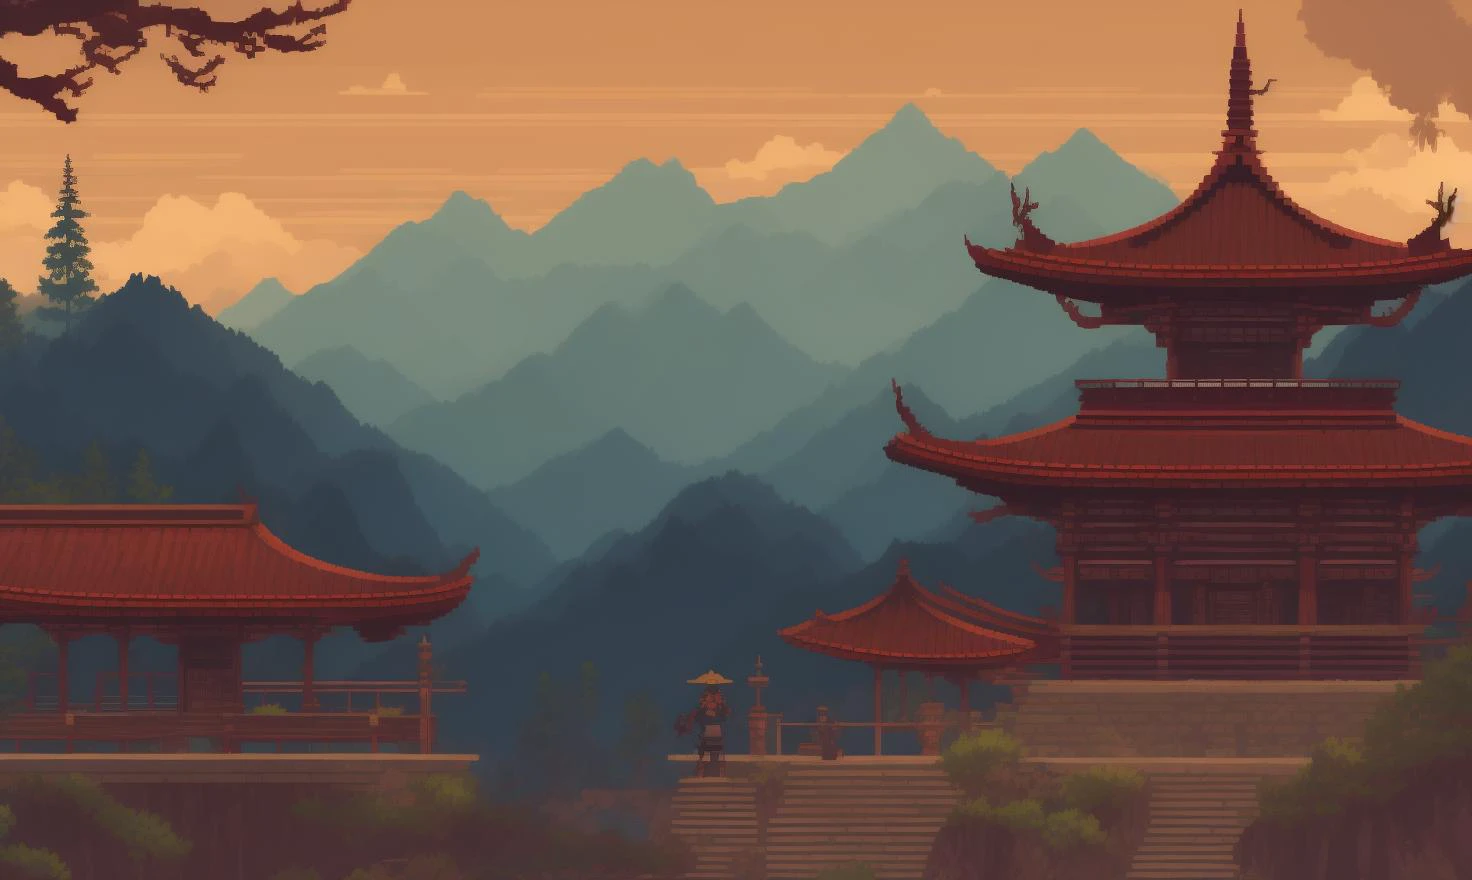 pixelart  video game cover art of a samurai standing in front of a Japanize temple with mountains in the distance, pixelart style